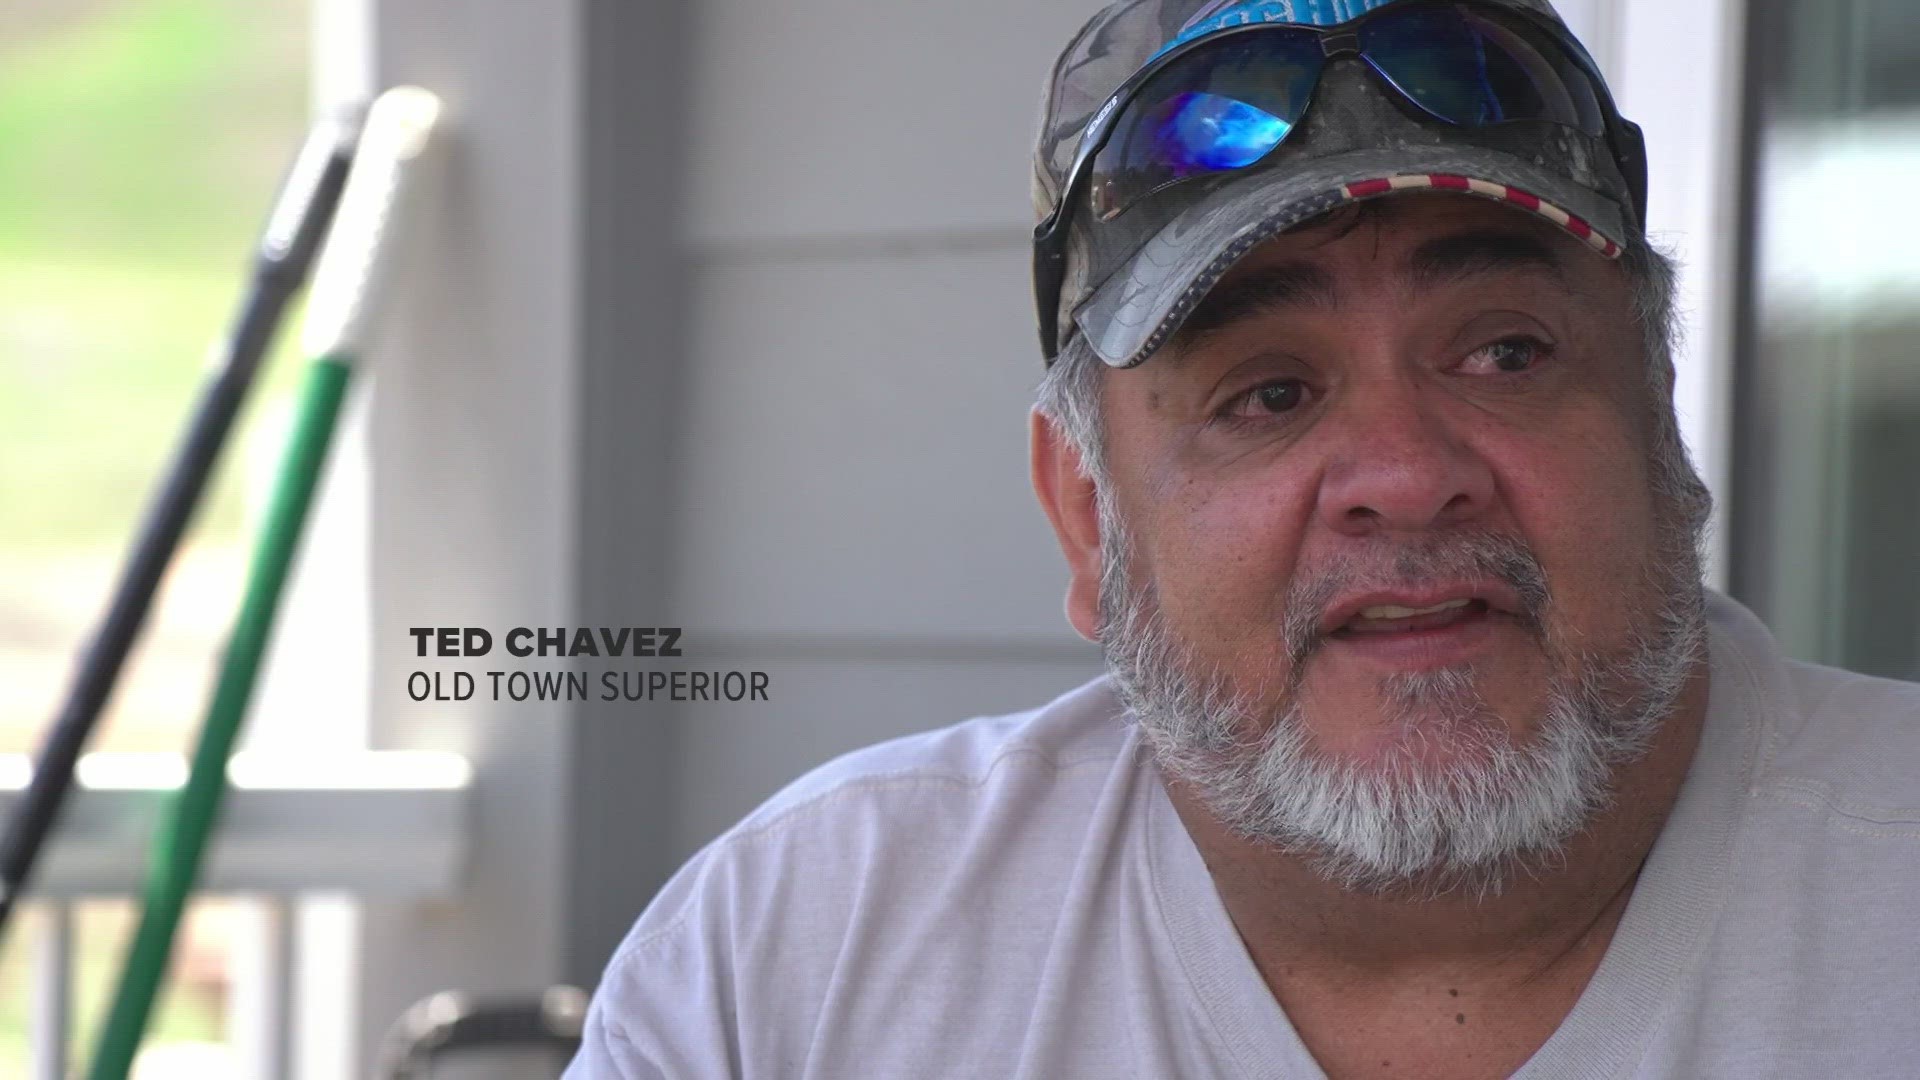 Ted Chavez is the first in his family to be back home, while other relatives continue to wait. The process has taken longer than they expected.